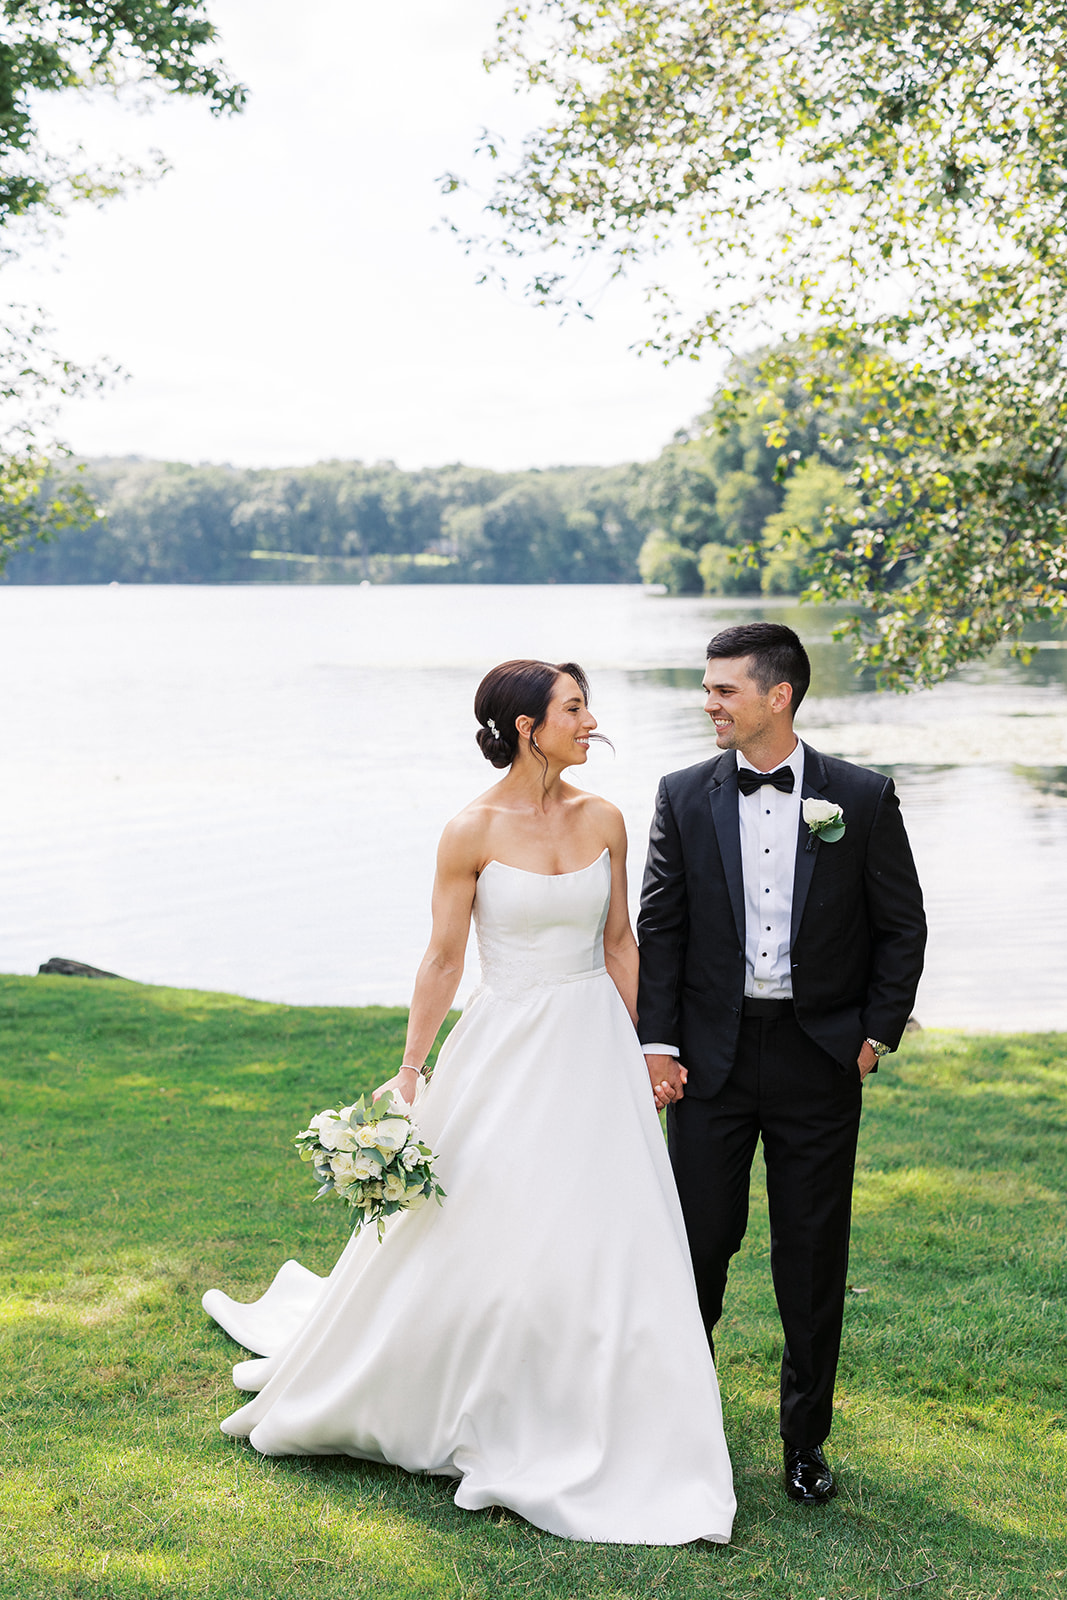 Newlyweds share a big smile while walking hand in hand on a lakeside lawn